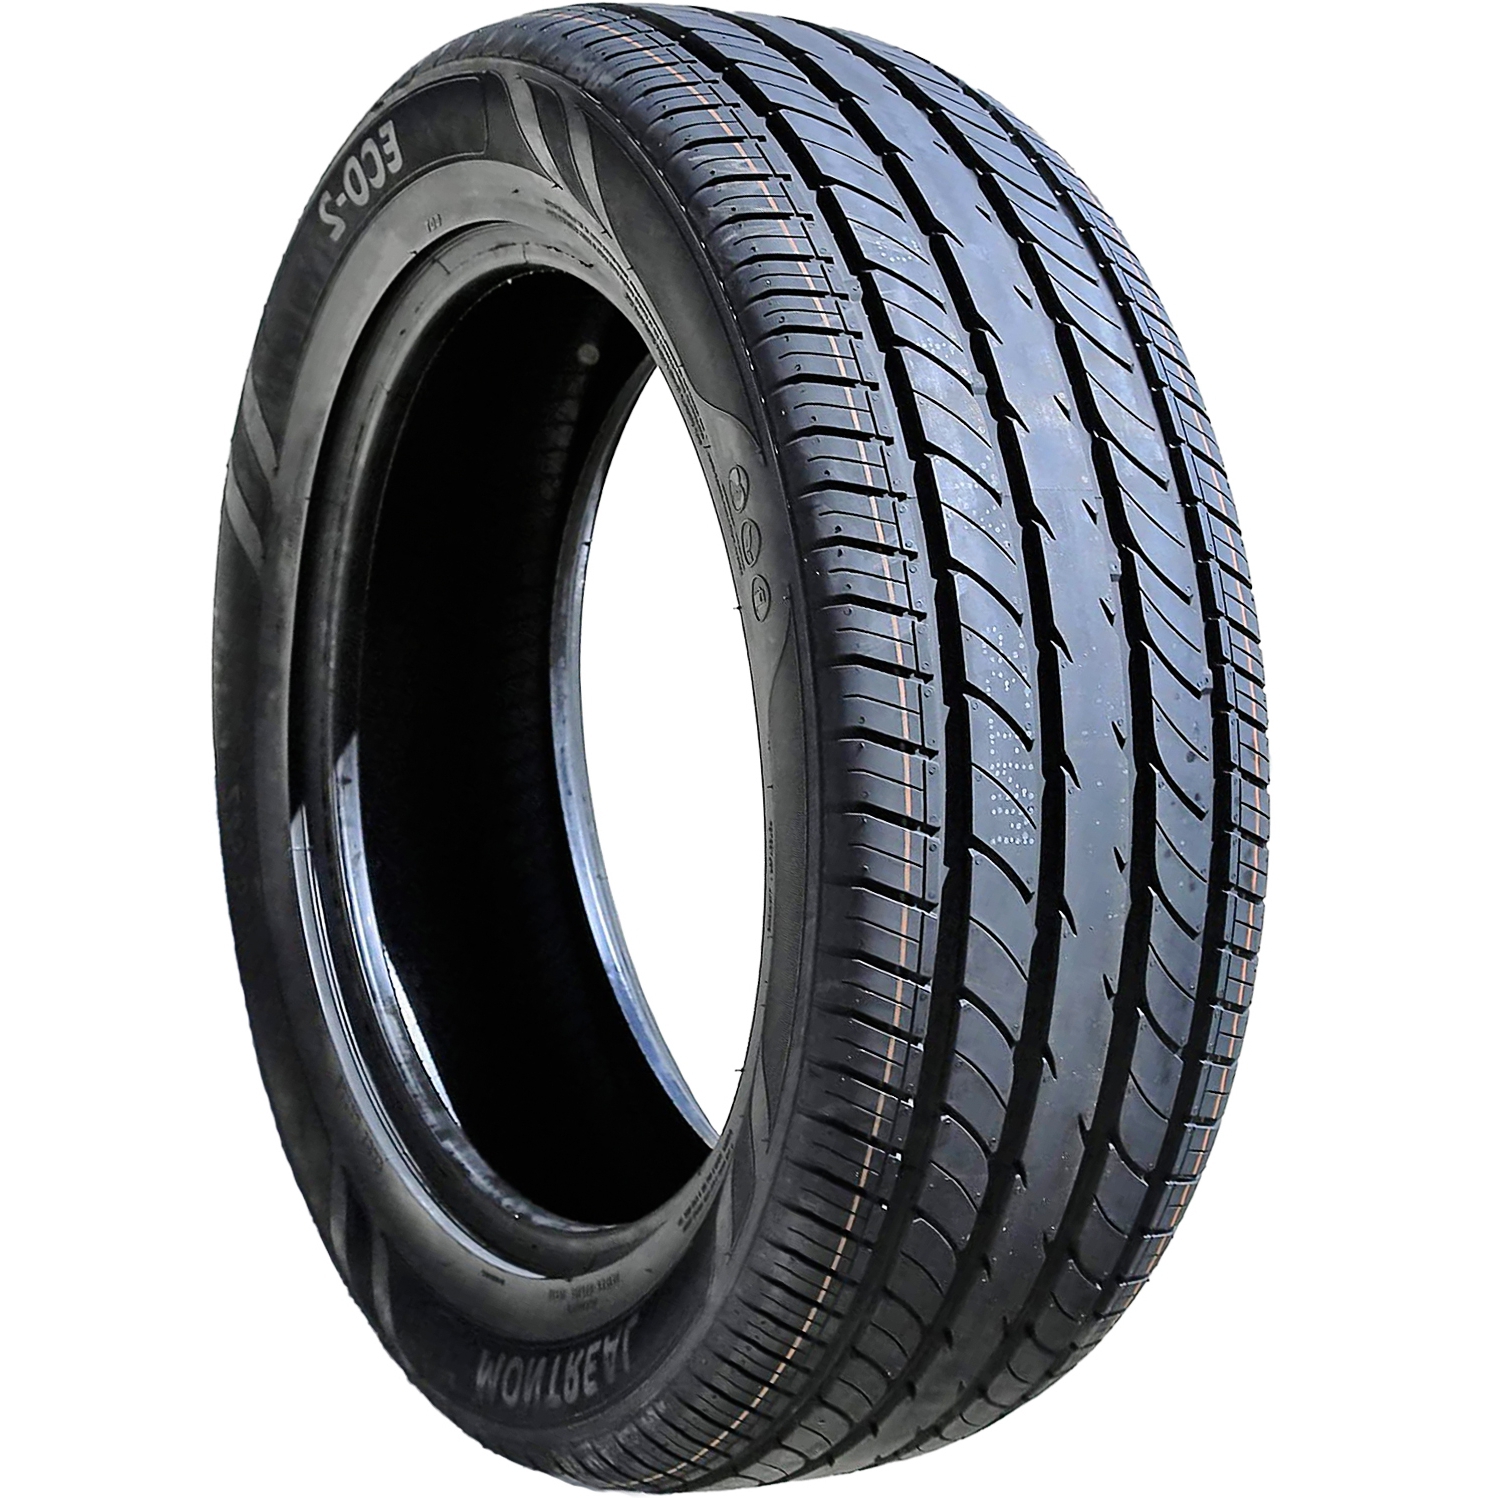 Tire Load Range and Ply Rating (In-Depth Guide) - TireMart.com Tire Blog